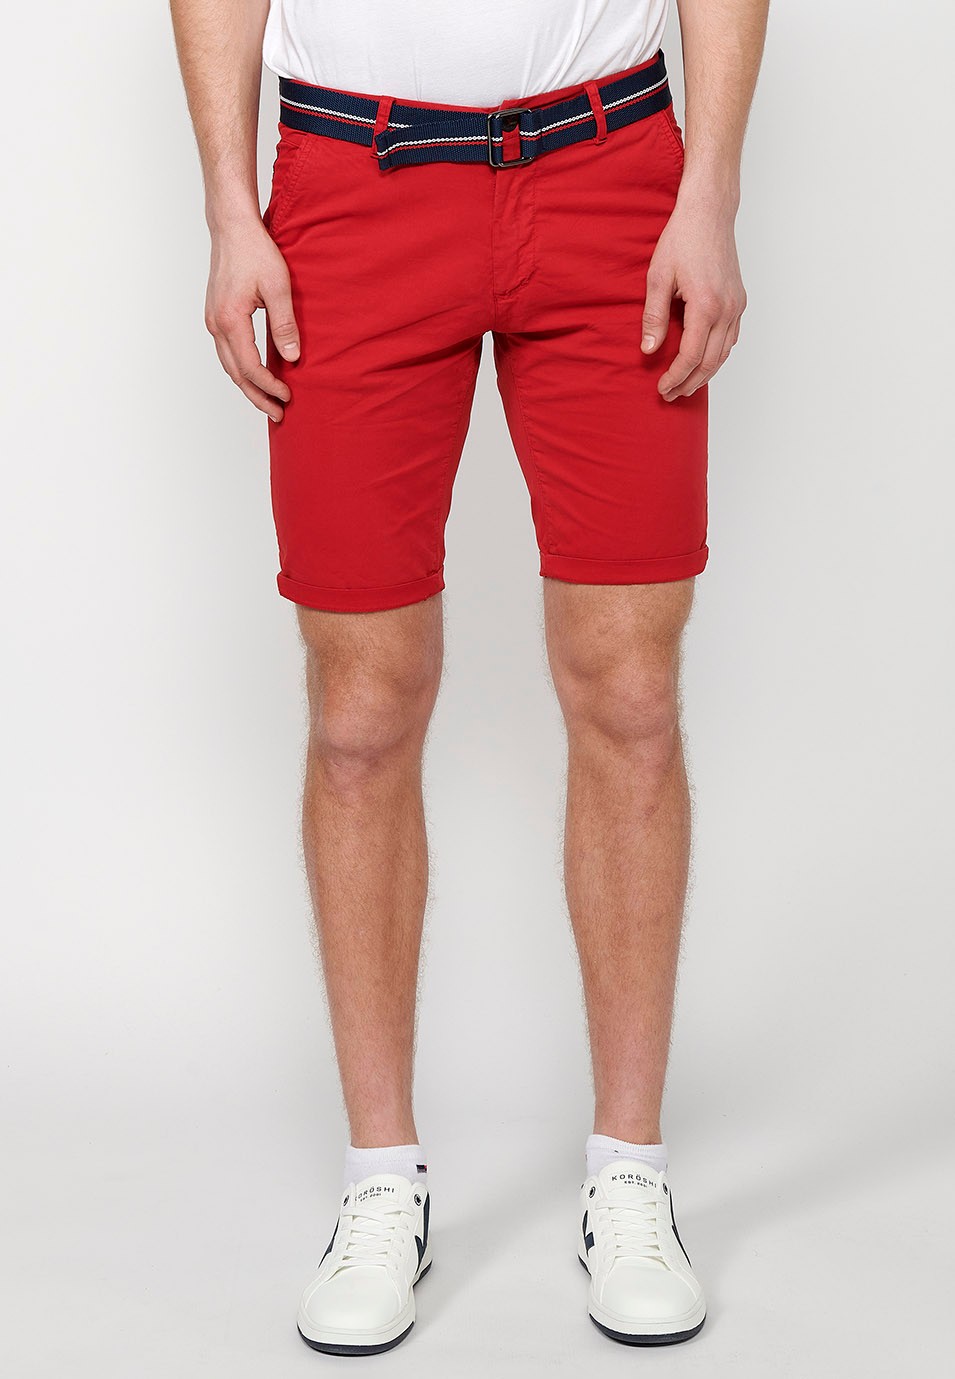 Shorts with cuffed finish with front closure with zipper and button and belt in Red for Men 4